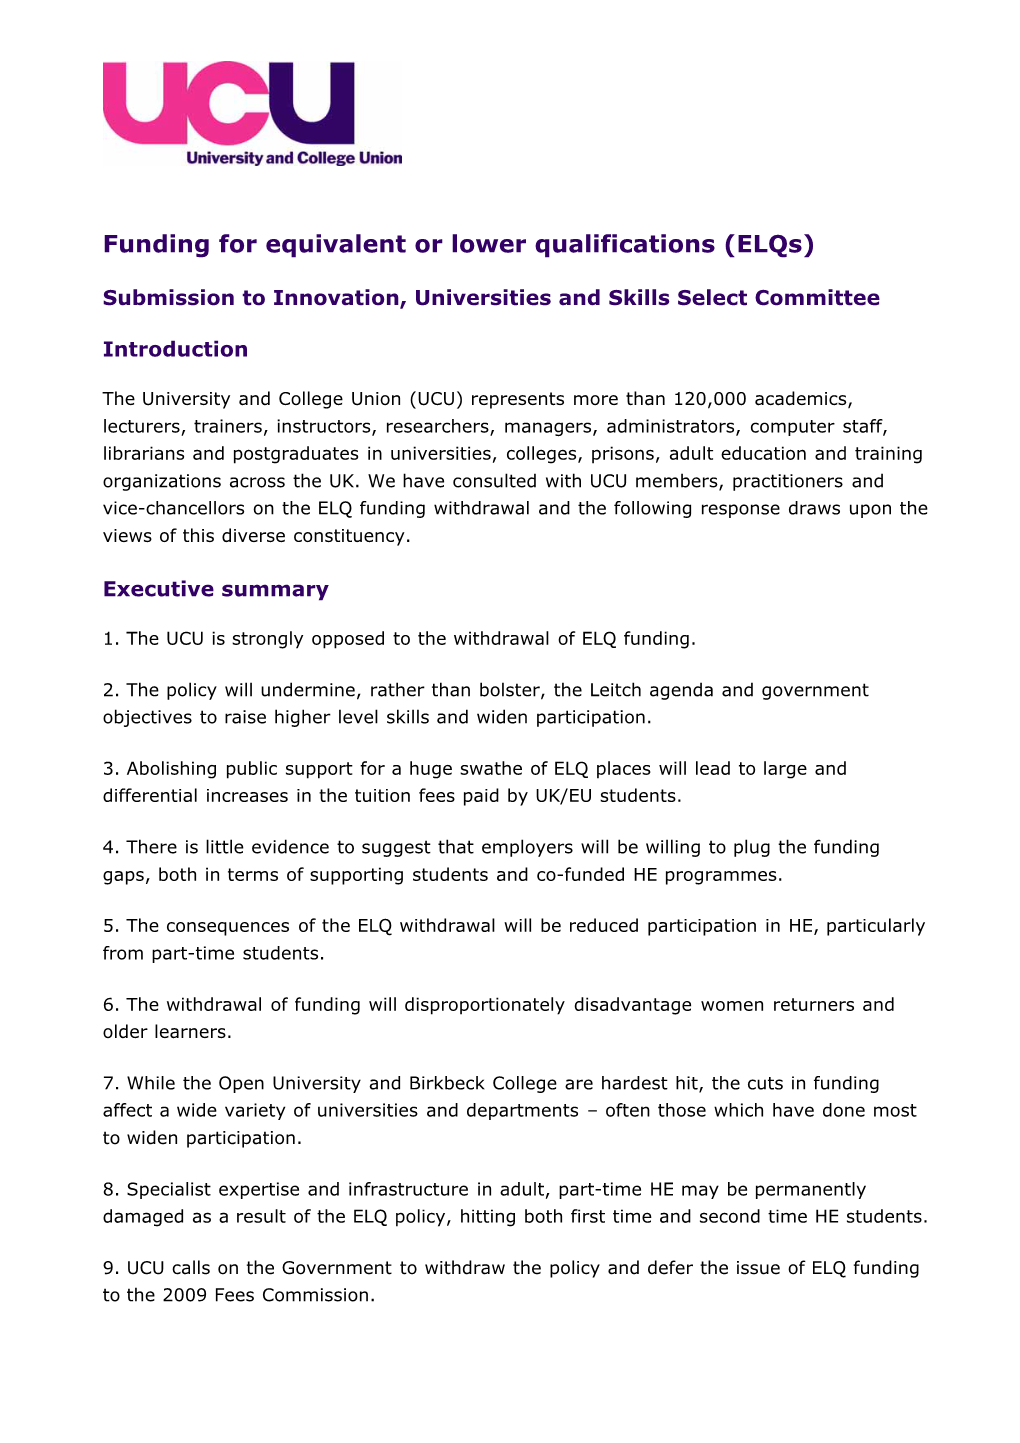 Funding for Equivalent Or Lower Qualifications (Elqs)